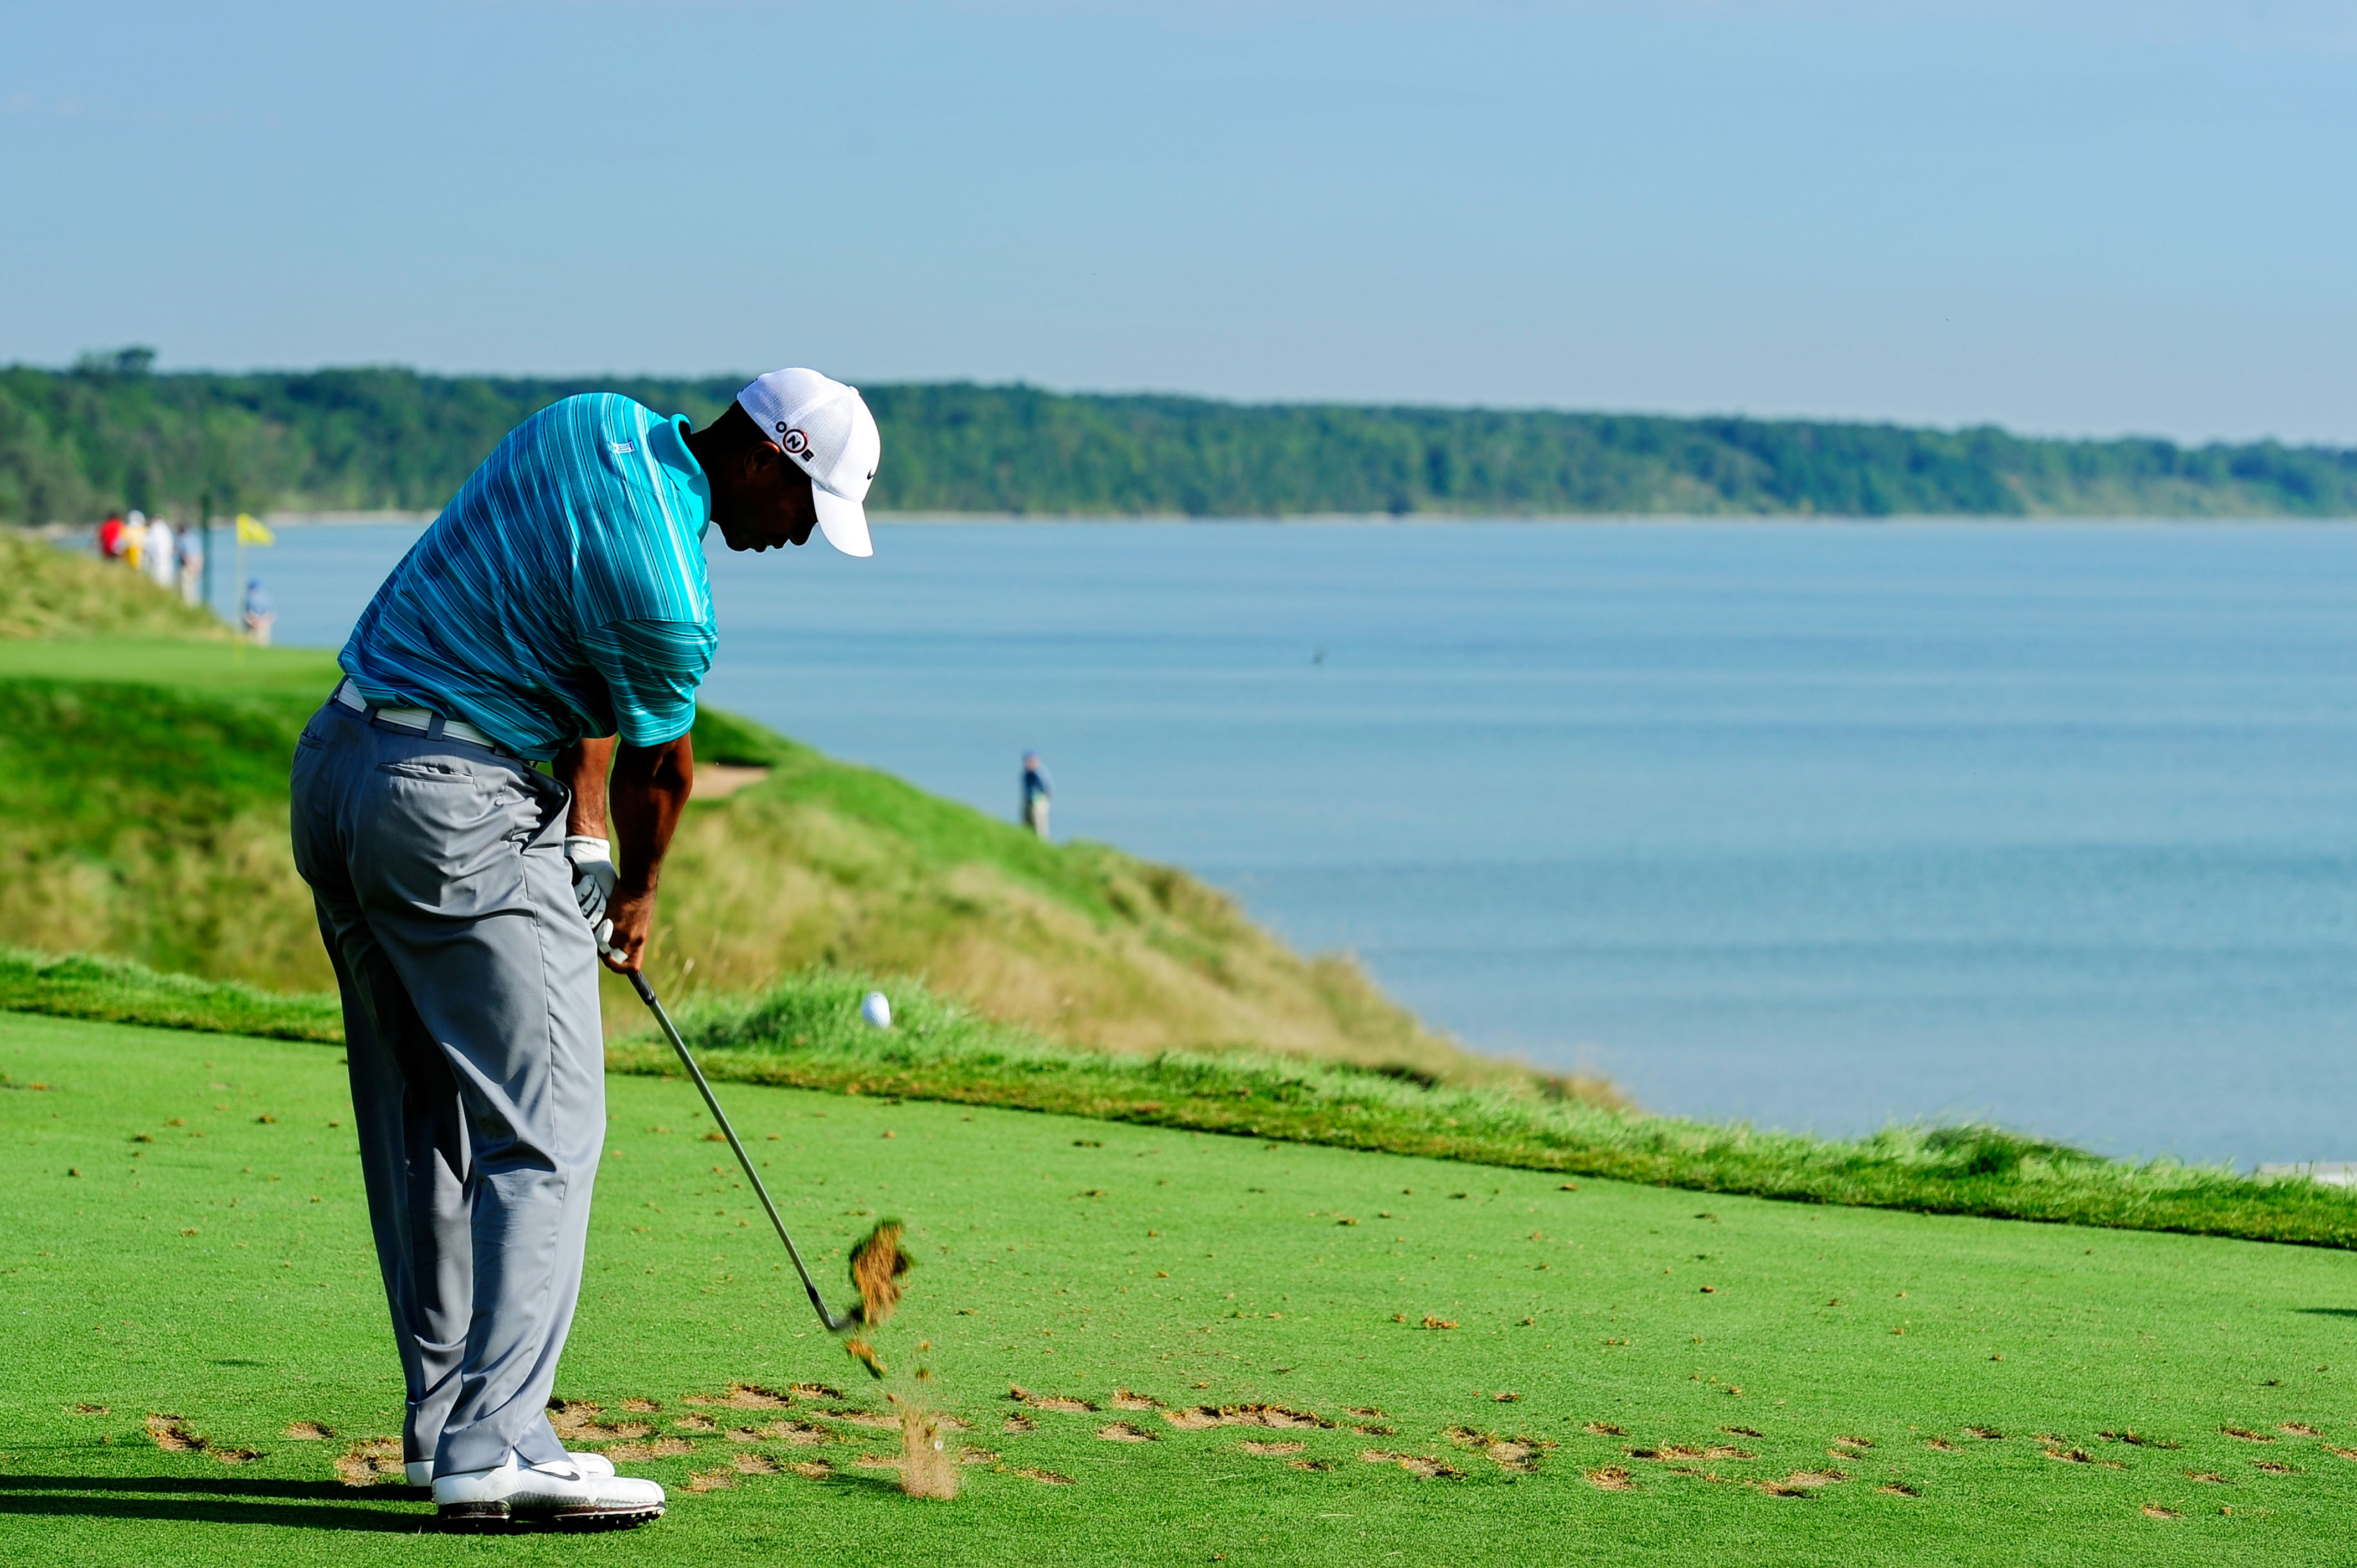 KOHLER, WI - AUGUST 14:  Tiger Woods hits his tee shot on the 12th hole during the continuation of the second round of the 92nd PGA Championship on the Straits Course at Whistling Straits on August 14, 2010 in Kohler, Wisconsin.  (Photo by Stuart Franklin